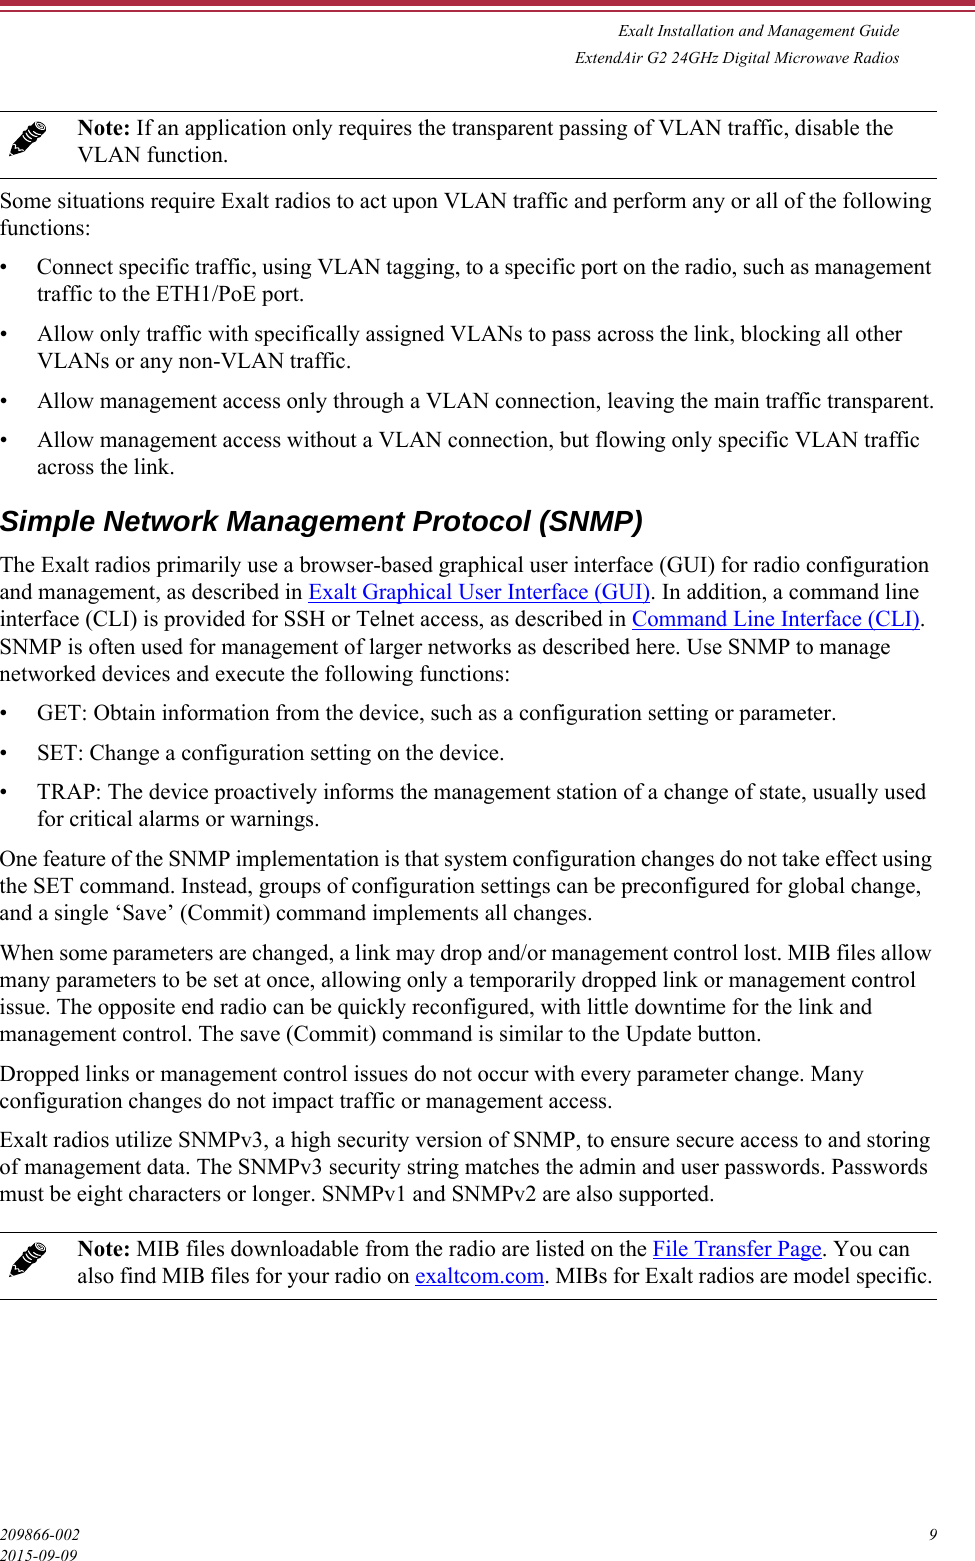 Exalt Installation and Management GuideExtendAir G2 24GHz Digital Microwave Radios209866-002 92015-09-09Some situations require Exalt radios to act upon VLAN traffic and perform any or all of the following functions:• Connect specific traffic, using VLAN tagging, to a specific port on the radio, such as management traffic to the ETH1/PoE port.• Allow only traffic with specifically assigned VLANs to pass across the link, blocking all other VLANs or any non-VLAN traffic.• Allow management access only through a VLAN connection, leaving the main traffic transparent.• Allow management access without a VLAN connection, but flowing only specific VLAN traffic across the link.Simple Network Management Protocol (SNMP)The Exalt radios primarily use a browser-based graphical user interface (GUI) for radio configuration and management, as described in Exalt Graphical User Interface (GUI). In addition, a command line interface (CLI) is provided for SSH or Telnet access, as described in Command Line Interface (CLI). SNMP is often used for management of larger networks as described here. Use SNMP to manage networked devices and execute the following functions:• GET: Obtain information from the device, such as a configuration setting or parameter.• SET: Change a configuration setting on the device.• TRAP: The device proactively informs the management station of a change of state, usually used for critical alarms or warnings.One feature of the SNMP implementation is that system configuration changes do not take effect using the SET command. Instead, groups of configuration settings can be preconfigured for global change, and a single ‘Save’ (Commit) command implements all changes.When some parameters are changed, a link may drop and/or management control lost. MIB files allow many parameters to be set at once, allowing only a temporarily dropped link or management control issue. The opposite end radio can be quickly reconfigured, with little downtime for the link and management control. The save (Commit) command is similar to the Update button. Dropped links or management control issues do not occur with every parameter change. Many configuration changes do not impact traffic or management access.Exalt radios utilize SNMPv3, a high security version of SNMP, to ensure secure access to and storing of management data. The SNMPv3 security string matches the admin and user passwords. Passwords must be eight characters or longer. SNMPv1 and SNMPv2 are also supported. Note: If an application only requires the transparent passing of VLAN traffic, disable the VLAN function. Note: MIB files downloadable from the radio are listed on the File Transfer Page. You can also find MIB files for your radio on exaltcom.com. MIBs for Exalt radios are model specific.